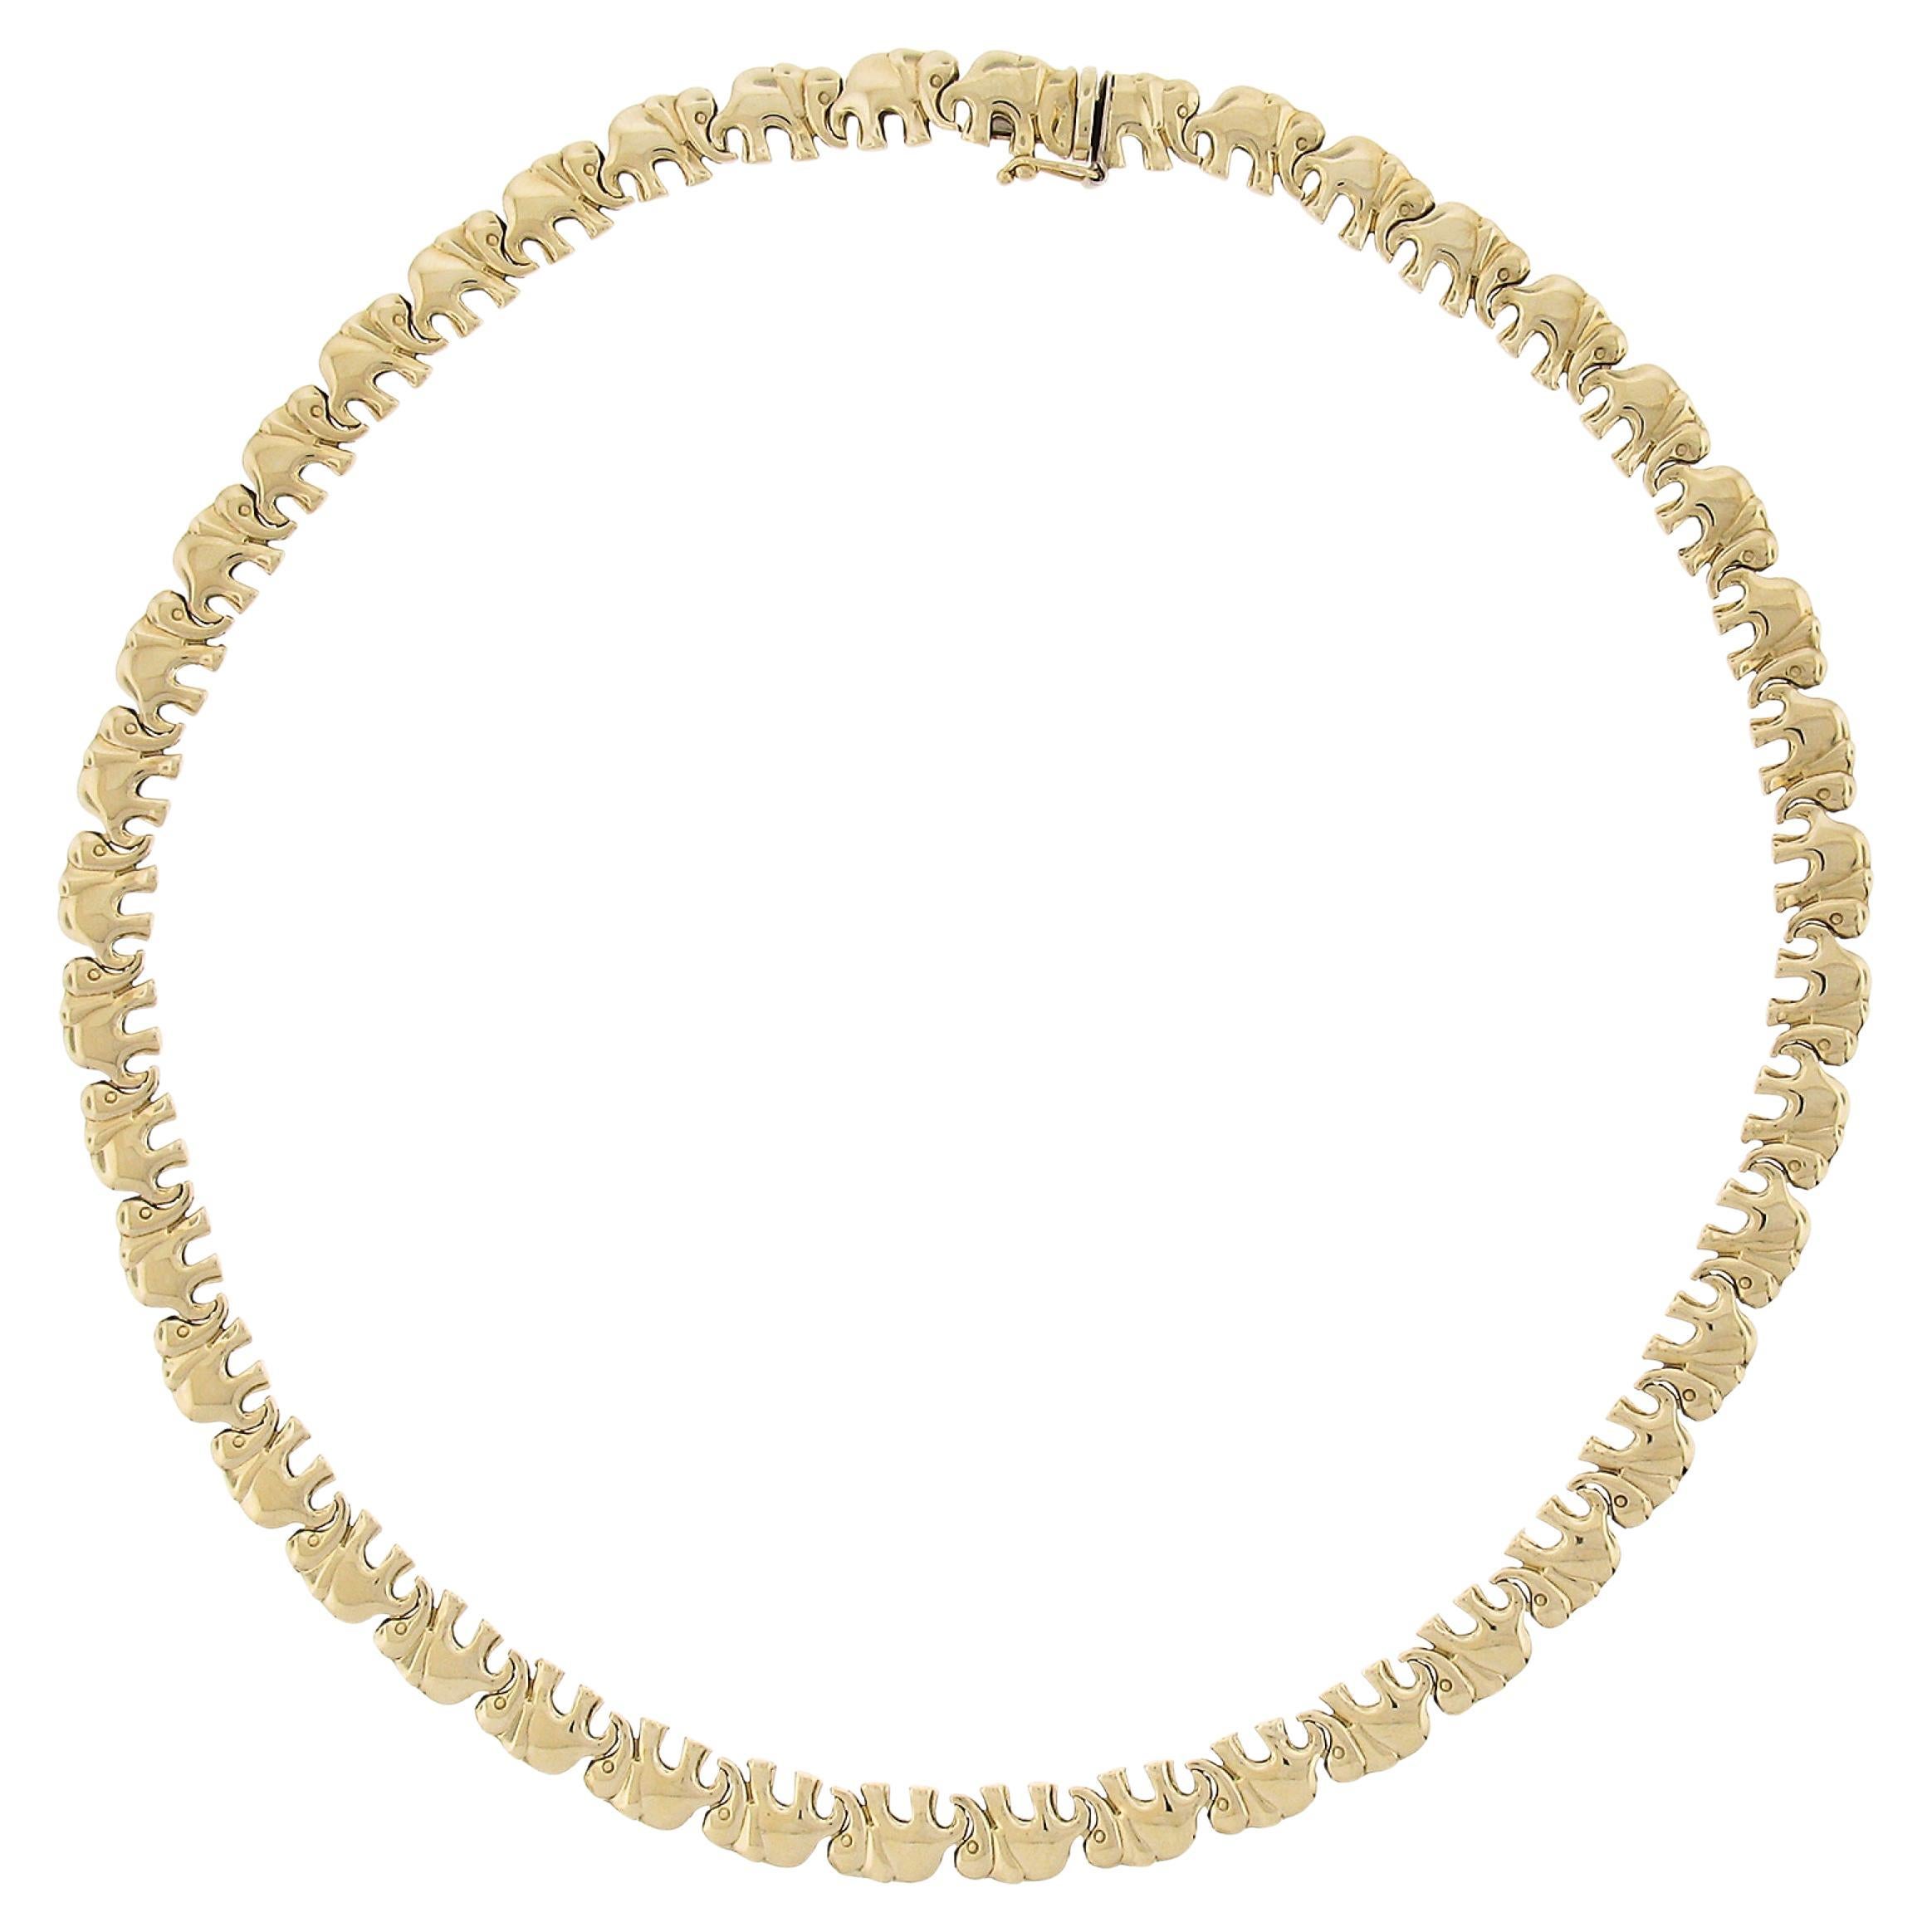 Italian 14K Yellow Gold 16" 7.9mm Polished Puffed Elephants Link Chain Necklace For Sale